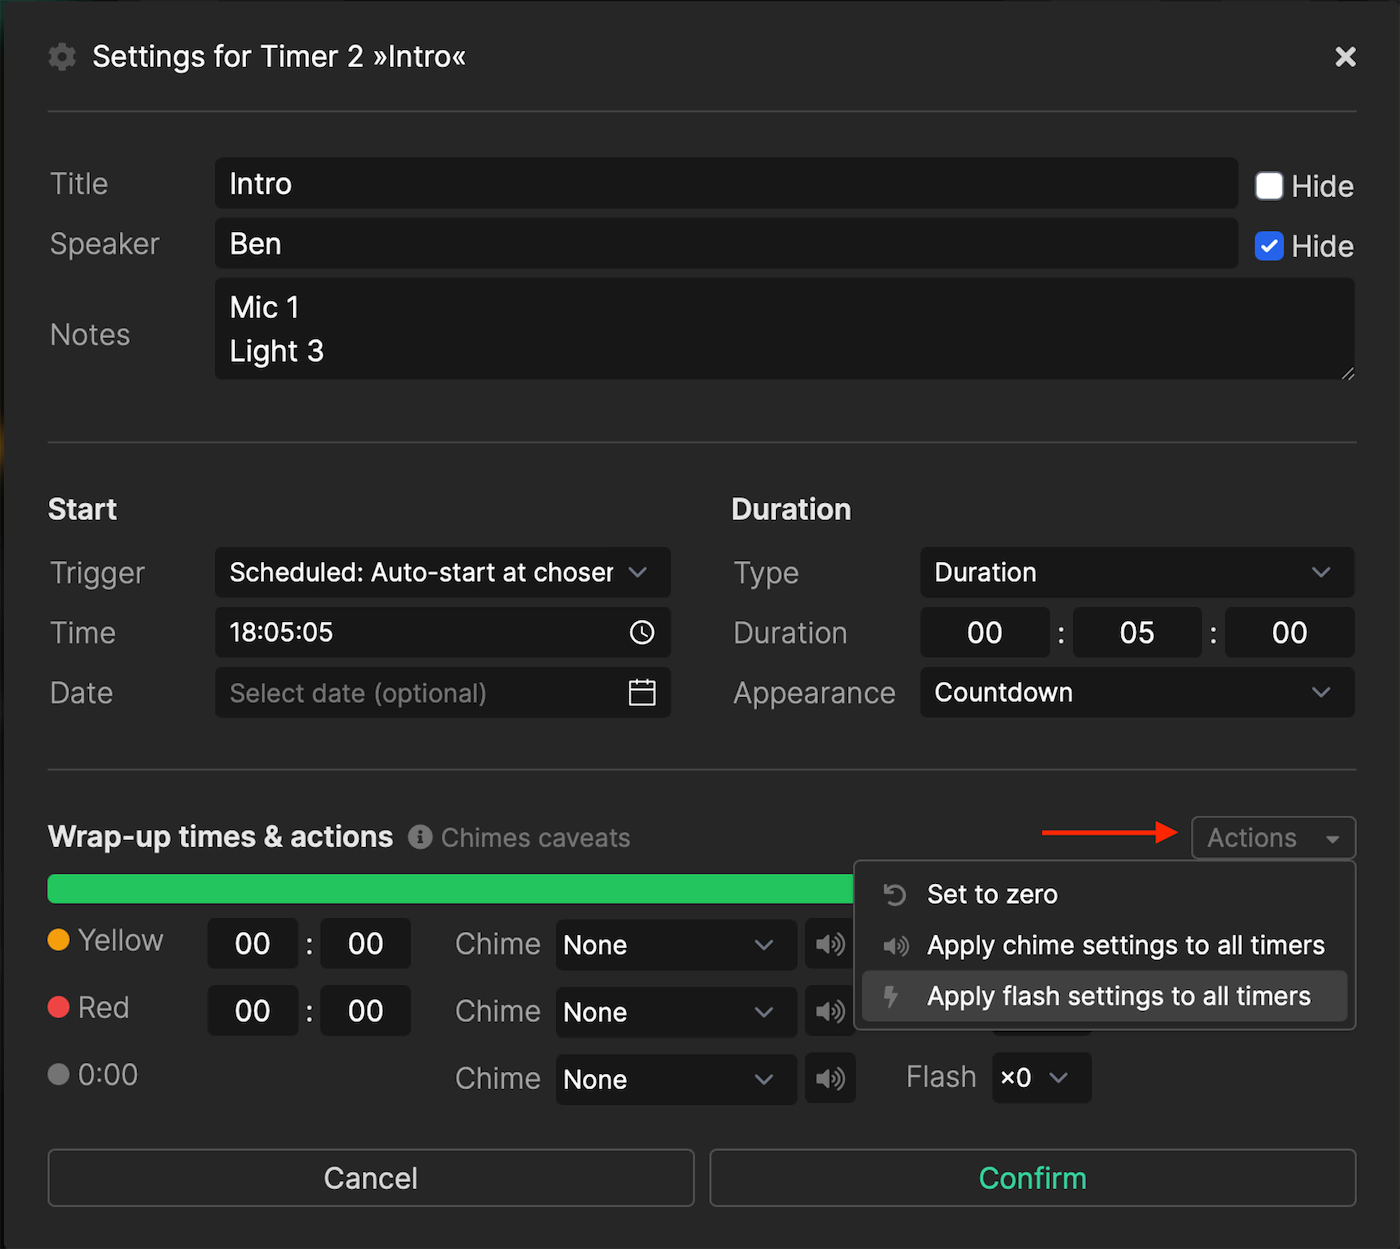 Use bulk actions to apply flash settings to all timers